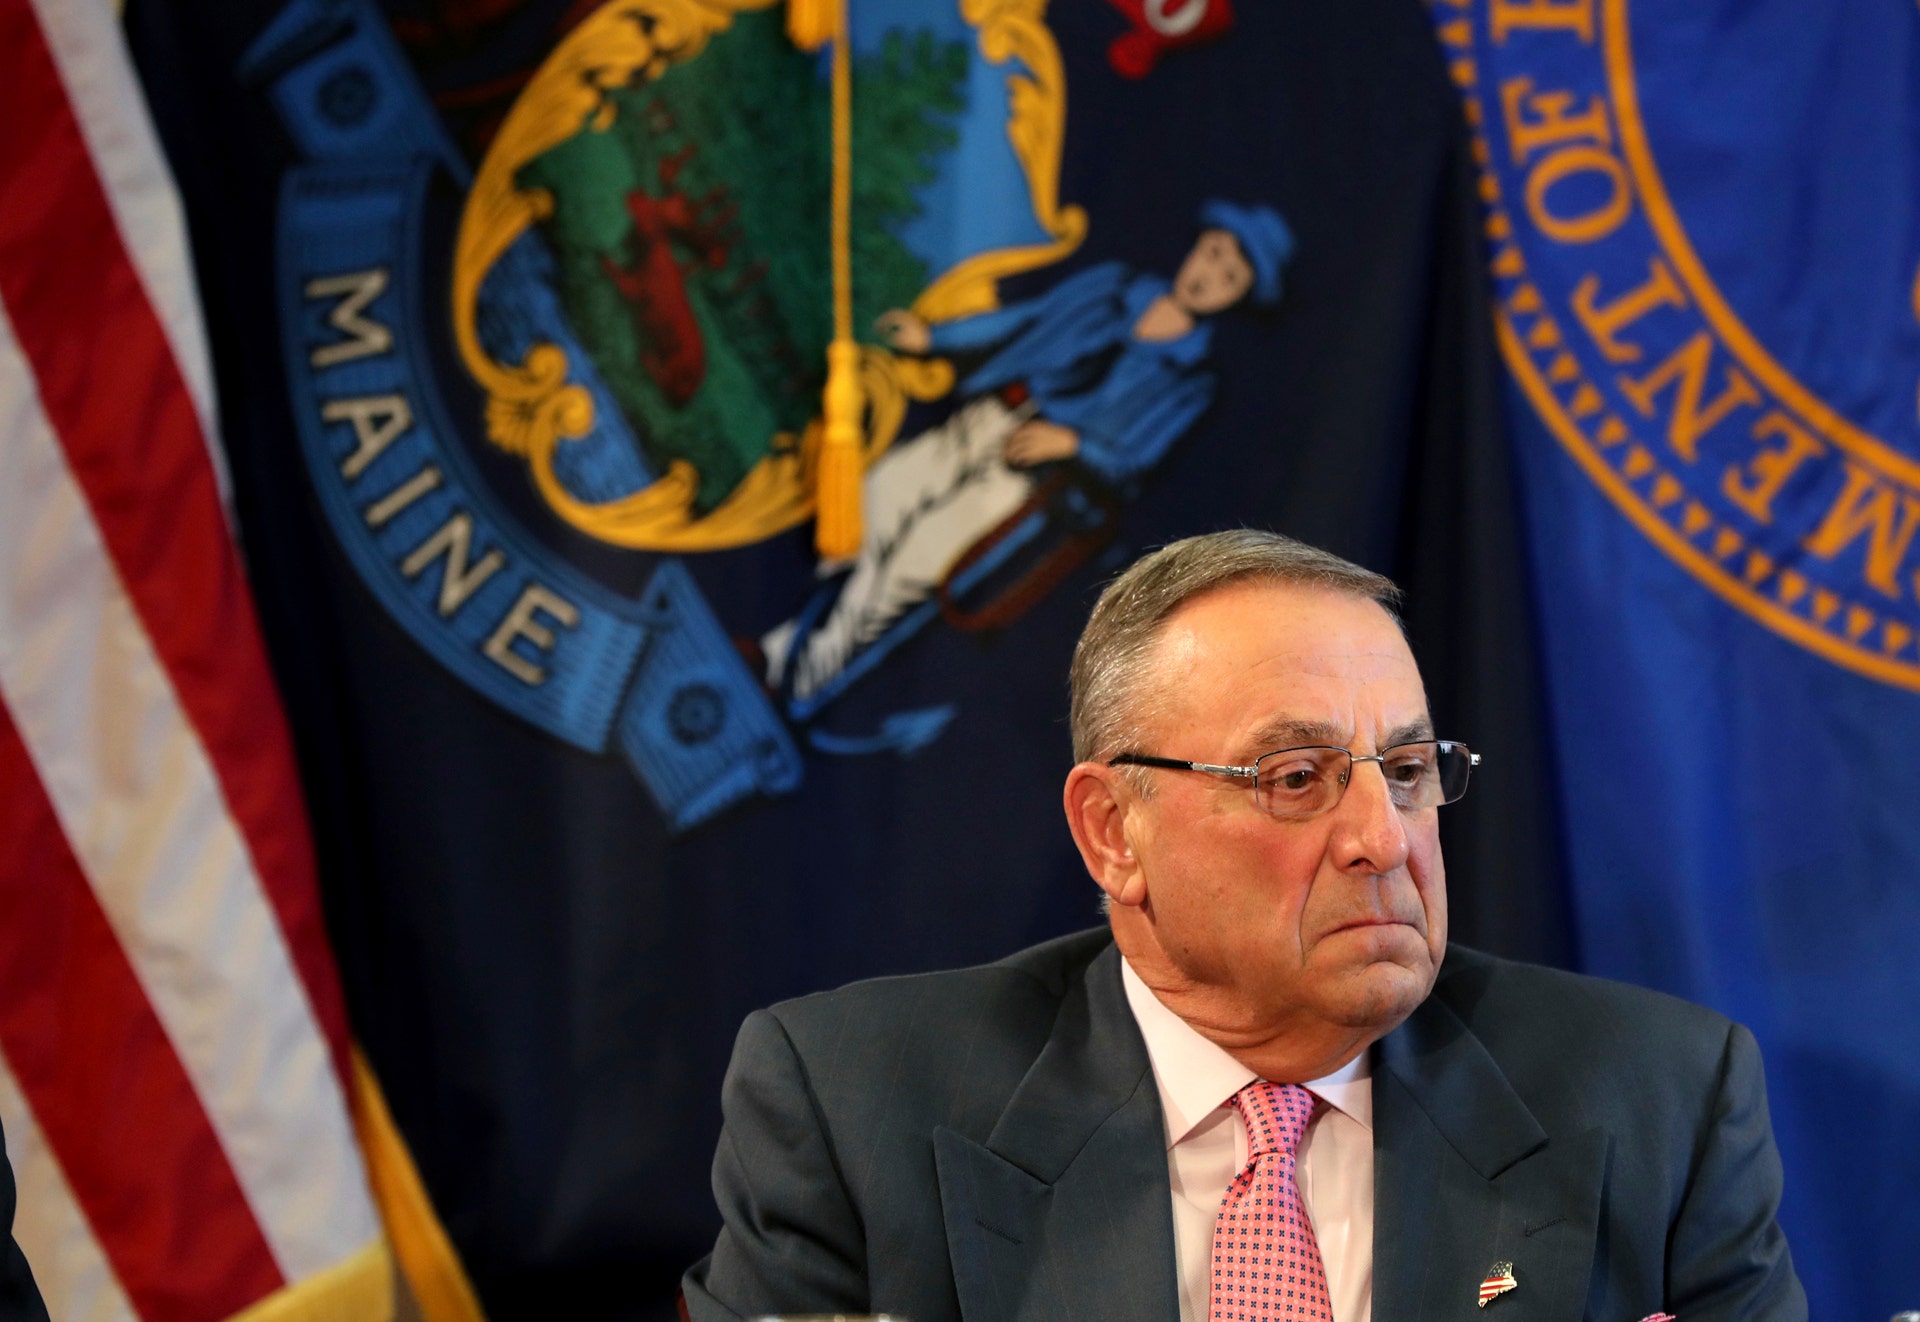 Controversial former Maine Gov. Paul LePage to run for a third term